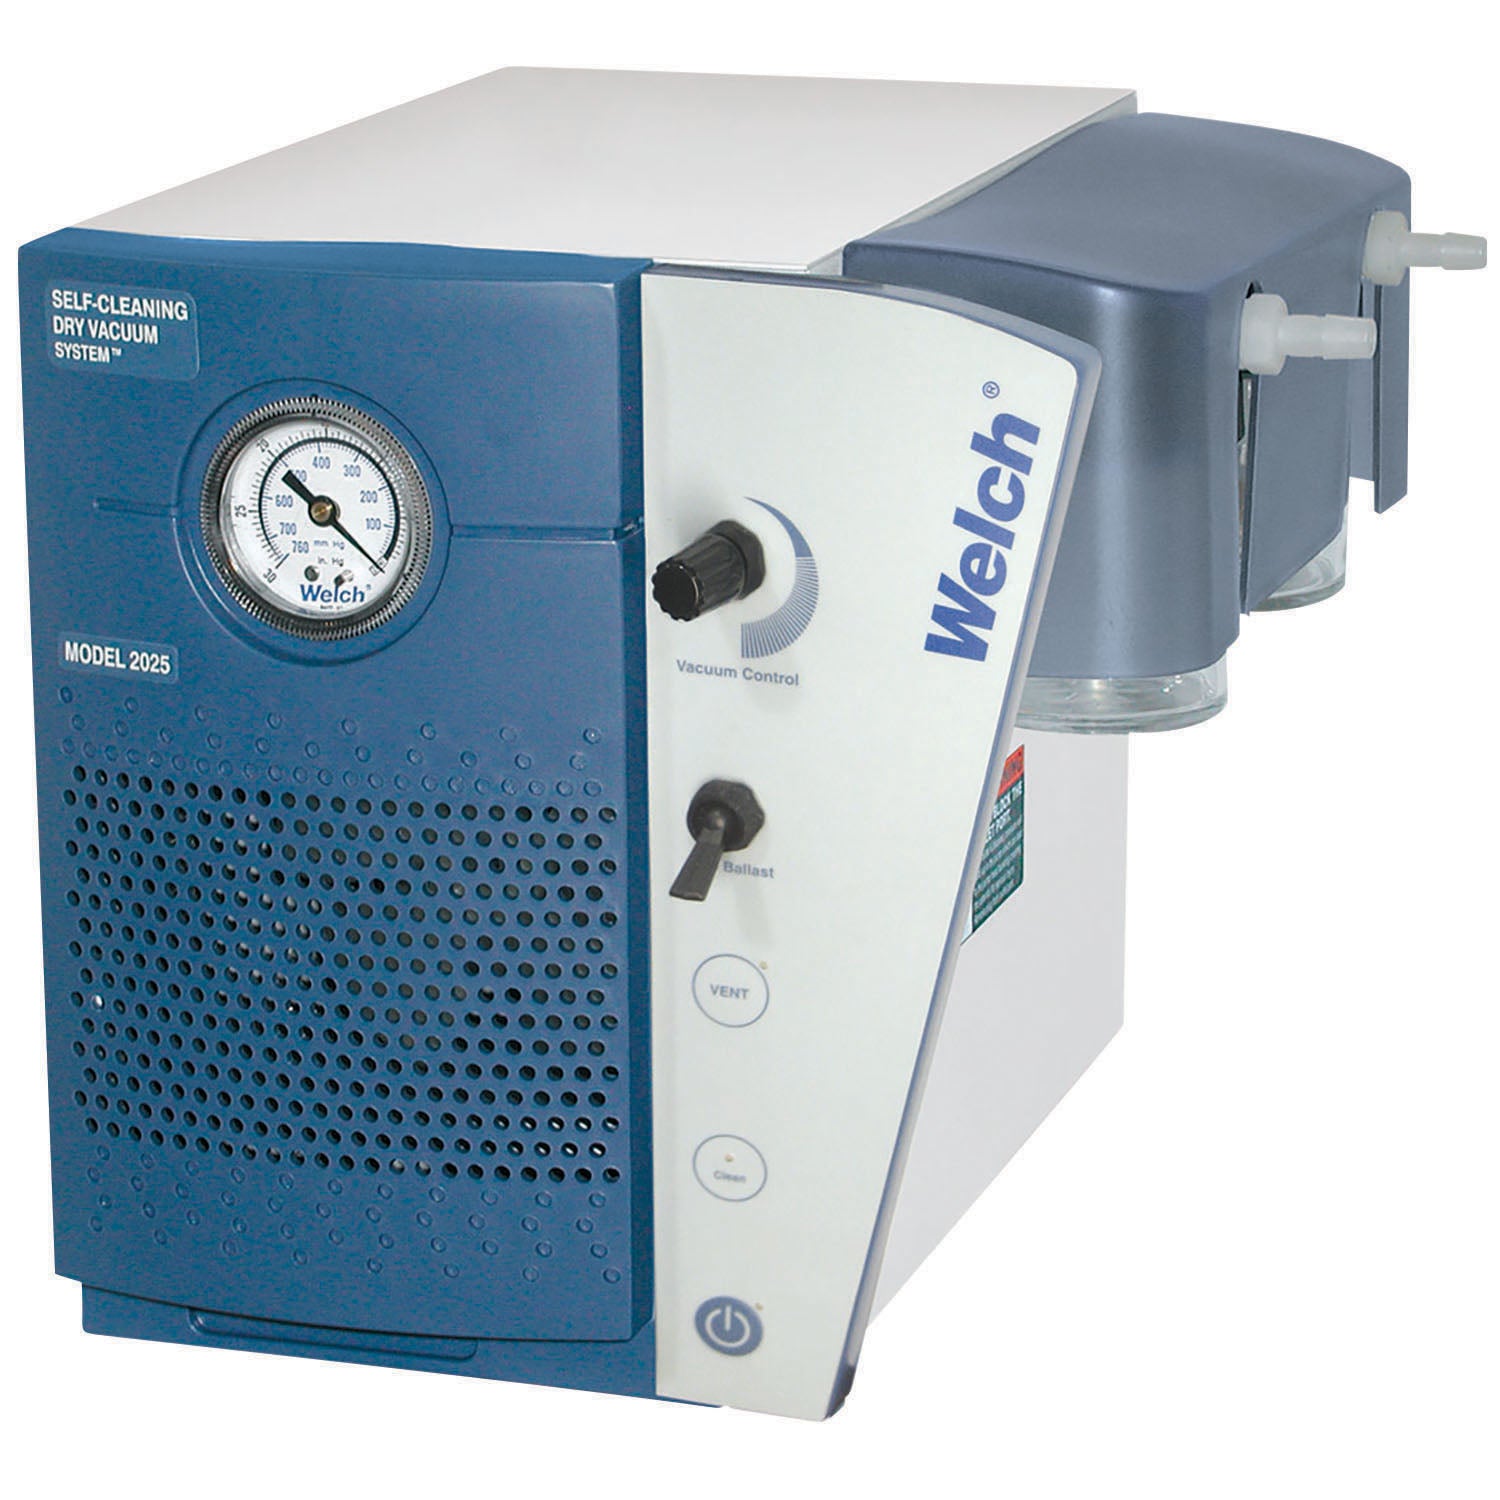 Welch 202501 Self-Cleaning Dry Vacuum Pump